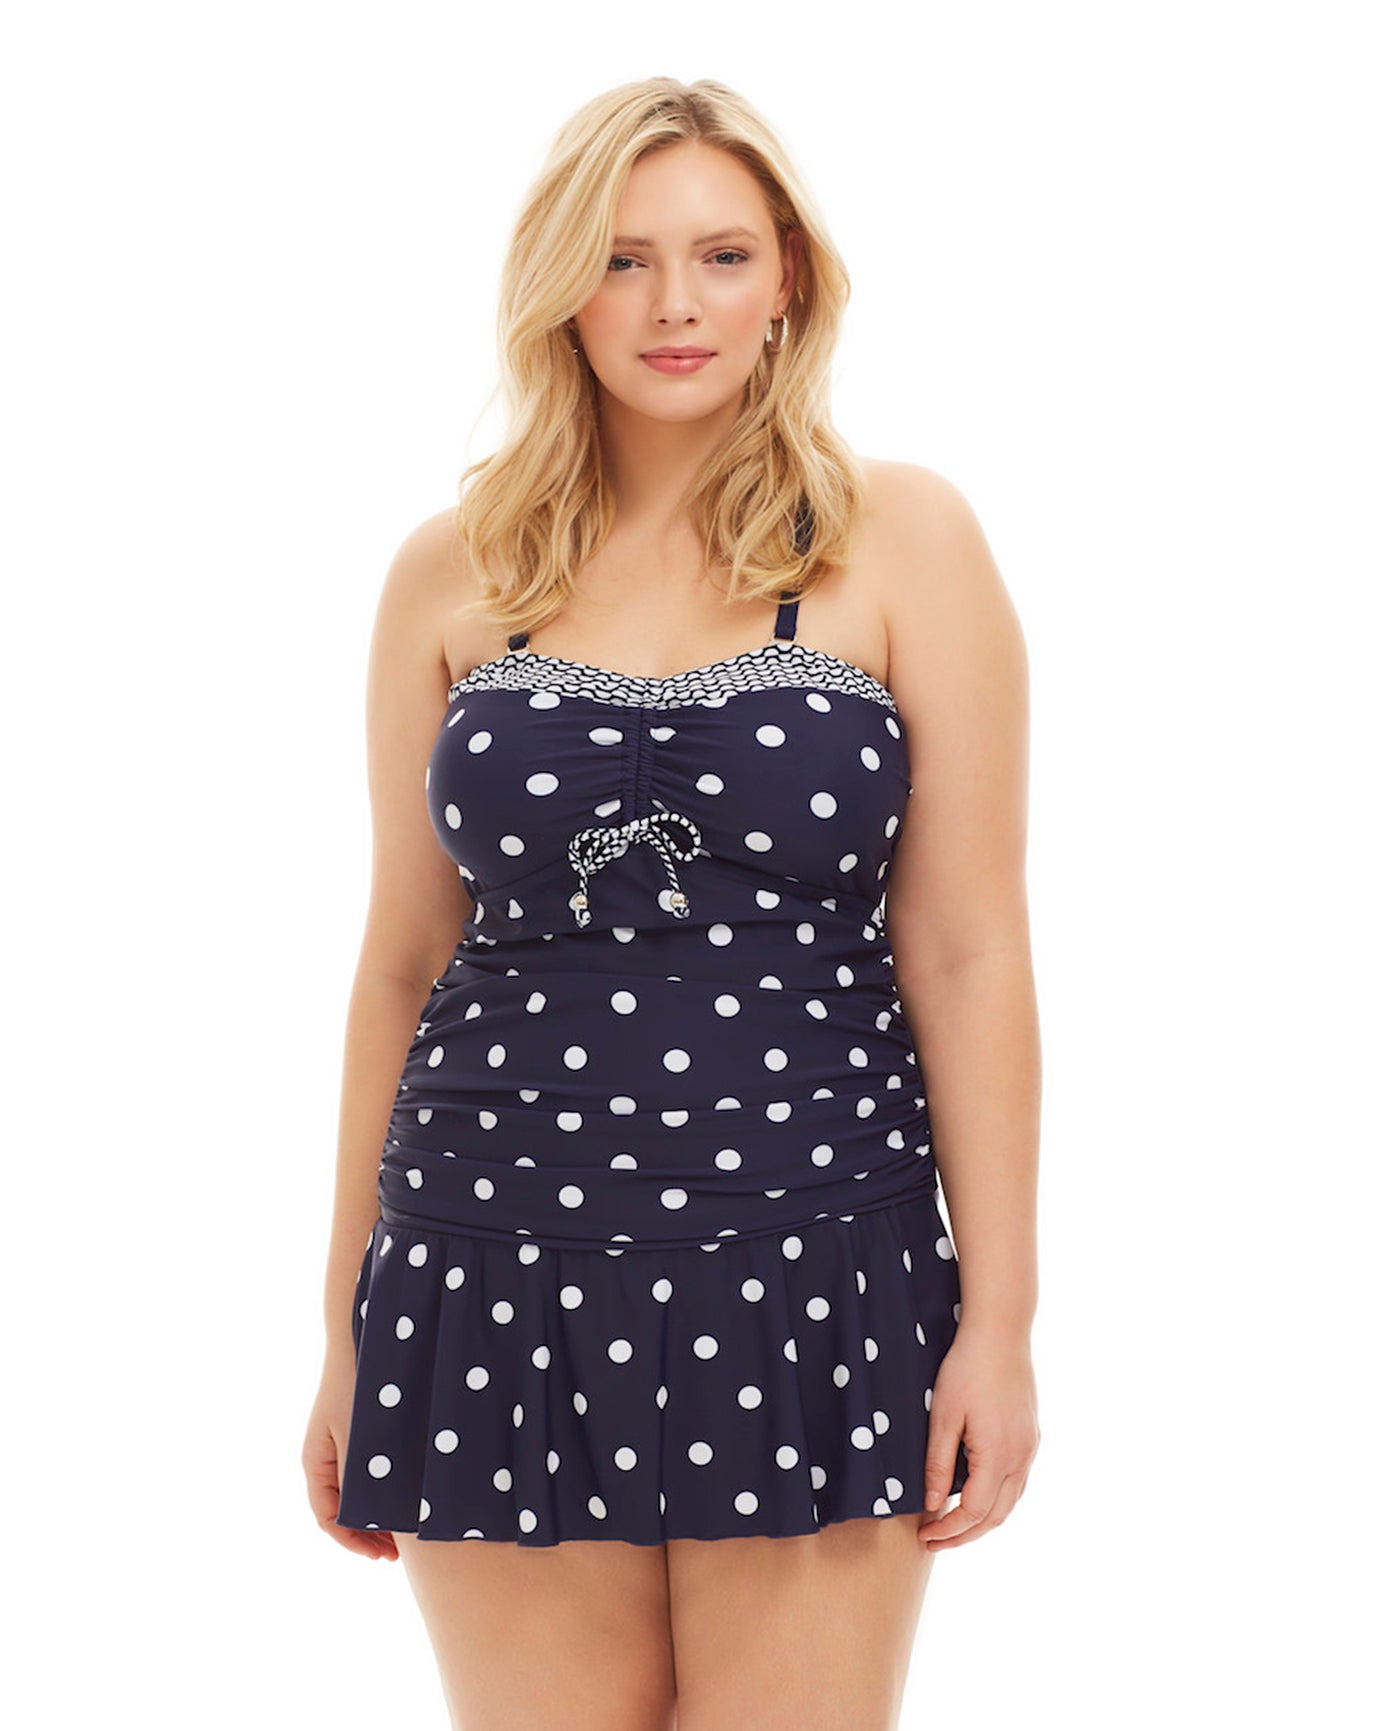 Always For Me Navy and White Dots Plus Size Daphne Bandeau